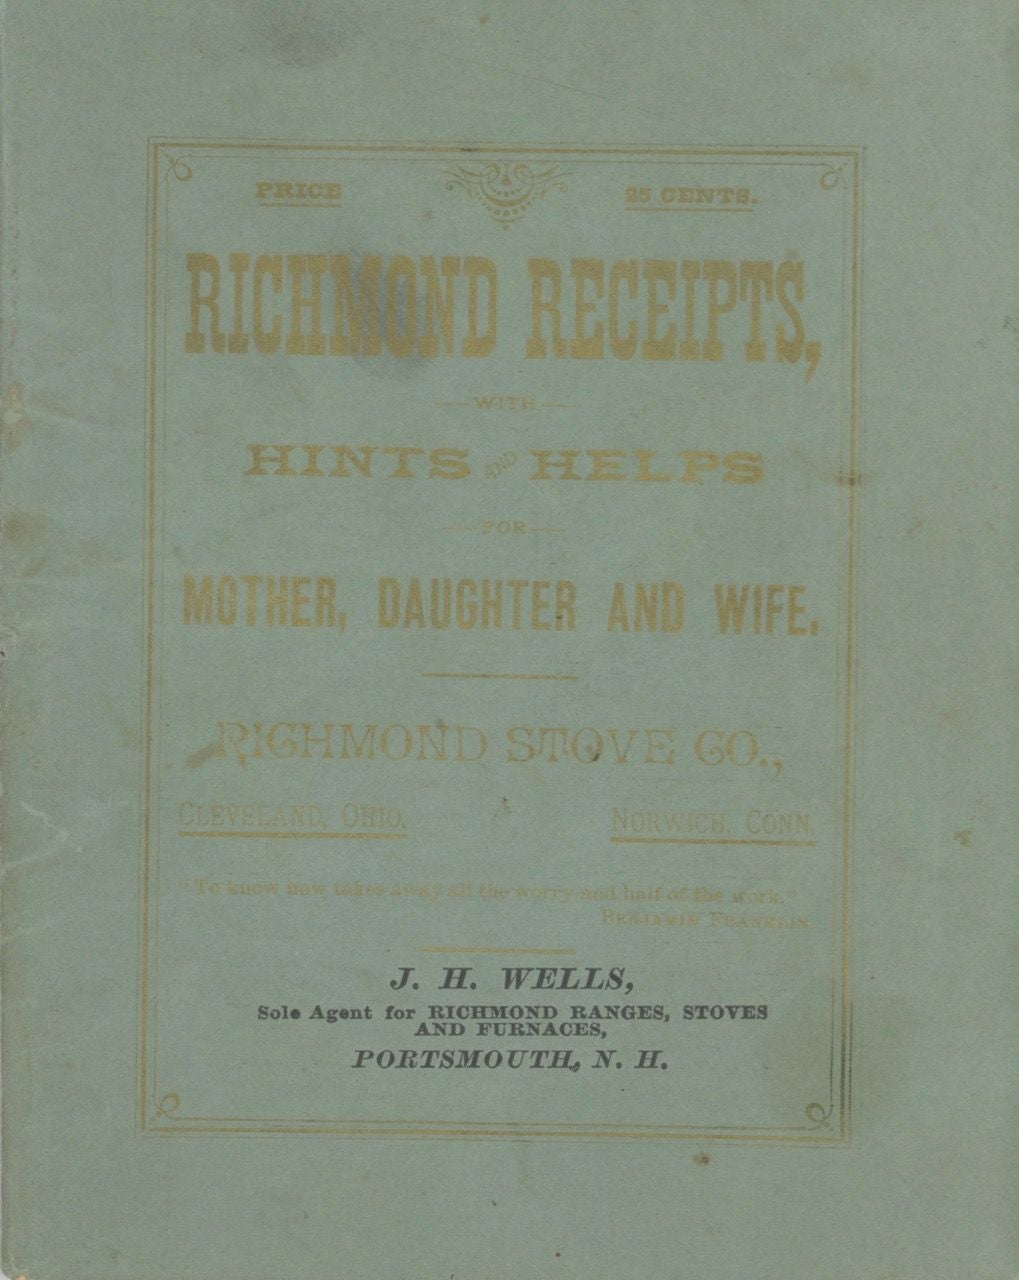 Item #5387 The Richmond Receipts with Hints and Helps for Mother, Daughter and Wife. Richmond Stove Company, Conn Norwich.